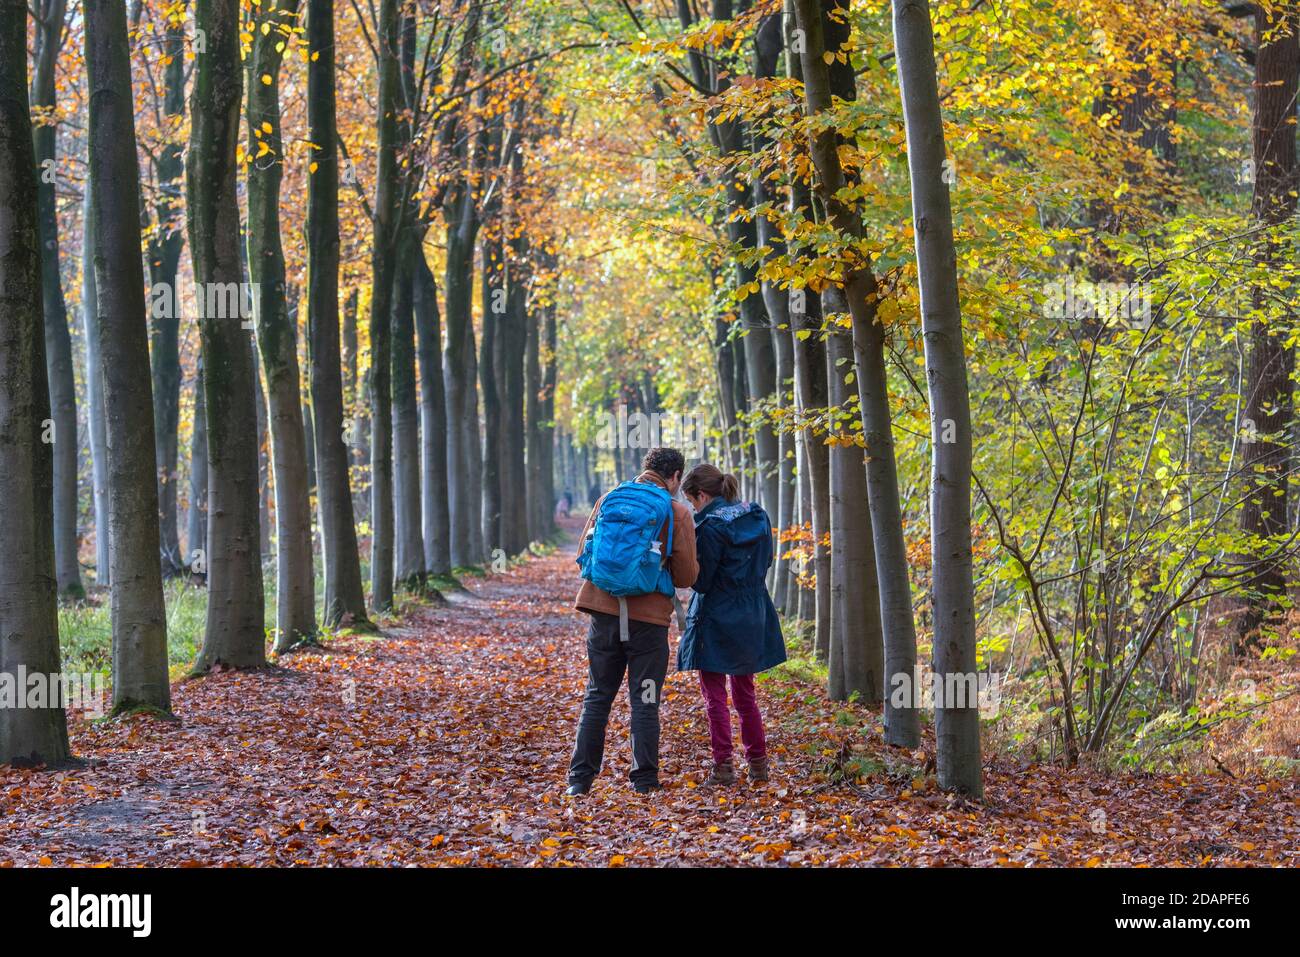 Couple reading map while walking along forest path in autumn woodland showing fall colors Stock Photo